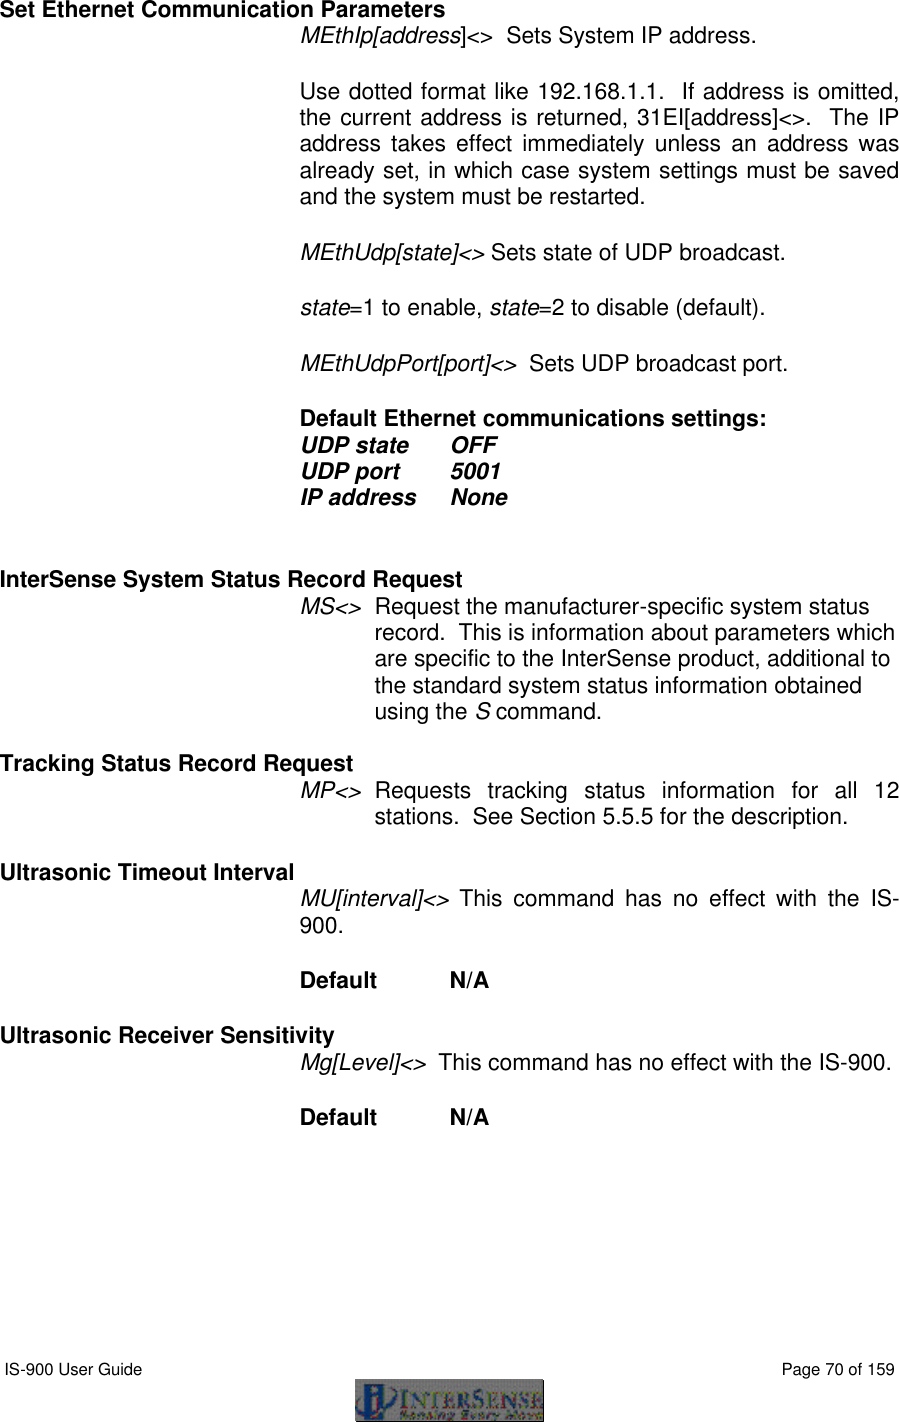  IS-900 User Guide                                                                                                                                          Page 70 of 159  Set Ethernet Communication Parameters MEthIp[address]&lt;&gt;  Sets System IP address.   Use dotted format like 192.168.1.1.  If address is omitted, the current address is returned, 31EI[address]&lt;&gt;.  The IP address takes effect immediately unless an address was already set, in which case system settings must be saved and the system must be restarted. MEthUdp[state]&lt;&gt; Sets state of UDP broadcast. state=1 to enable, state=2 to disable (default).   MEthUdpPort[port]&lt;&gt;  Sets UDP broadcast port.   Default Ethernet communications settings:  UDP state OFF UDP port 5001 IP address None  InterSense System Status Record Request MS&lt;&gt; Request the manufacturer-specific system status record.  This is information about parameters which are specific to the InterSense product, additional to the standard system status information obtained using the S command.  Tracking Status Record Request MP&lt;&gt; Requests tracking status information for all 12 stations.  See Section 5.5.5 for the description.   Ultrasonic Timeout Interval  MU[interval]&lt;&gt;  This command has no effect with the IS-900. Default  N/A Ultrasonic Receiver Sensitivity Mg[Level]&lt;&gt;  This command has no effect with the IS-900. Default  N/A 